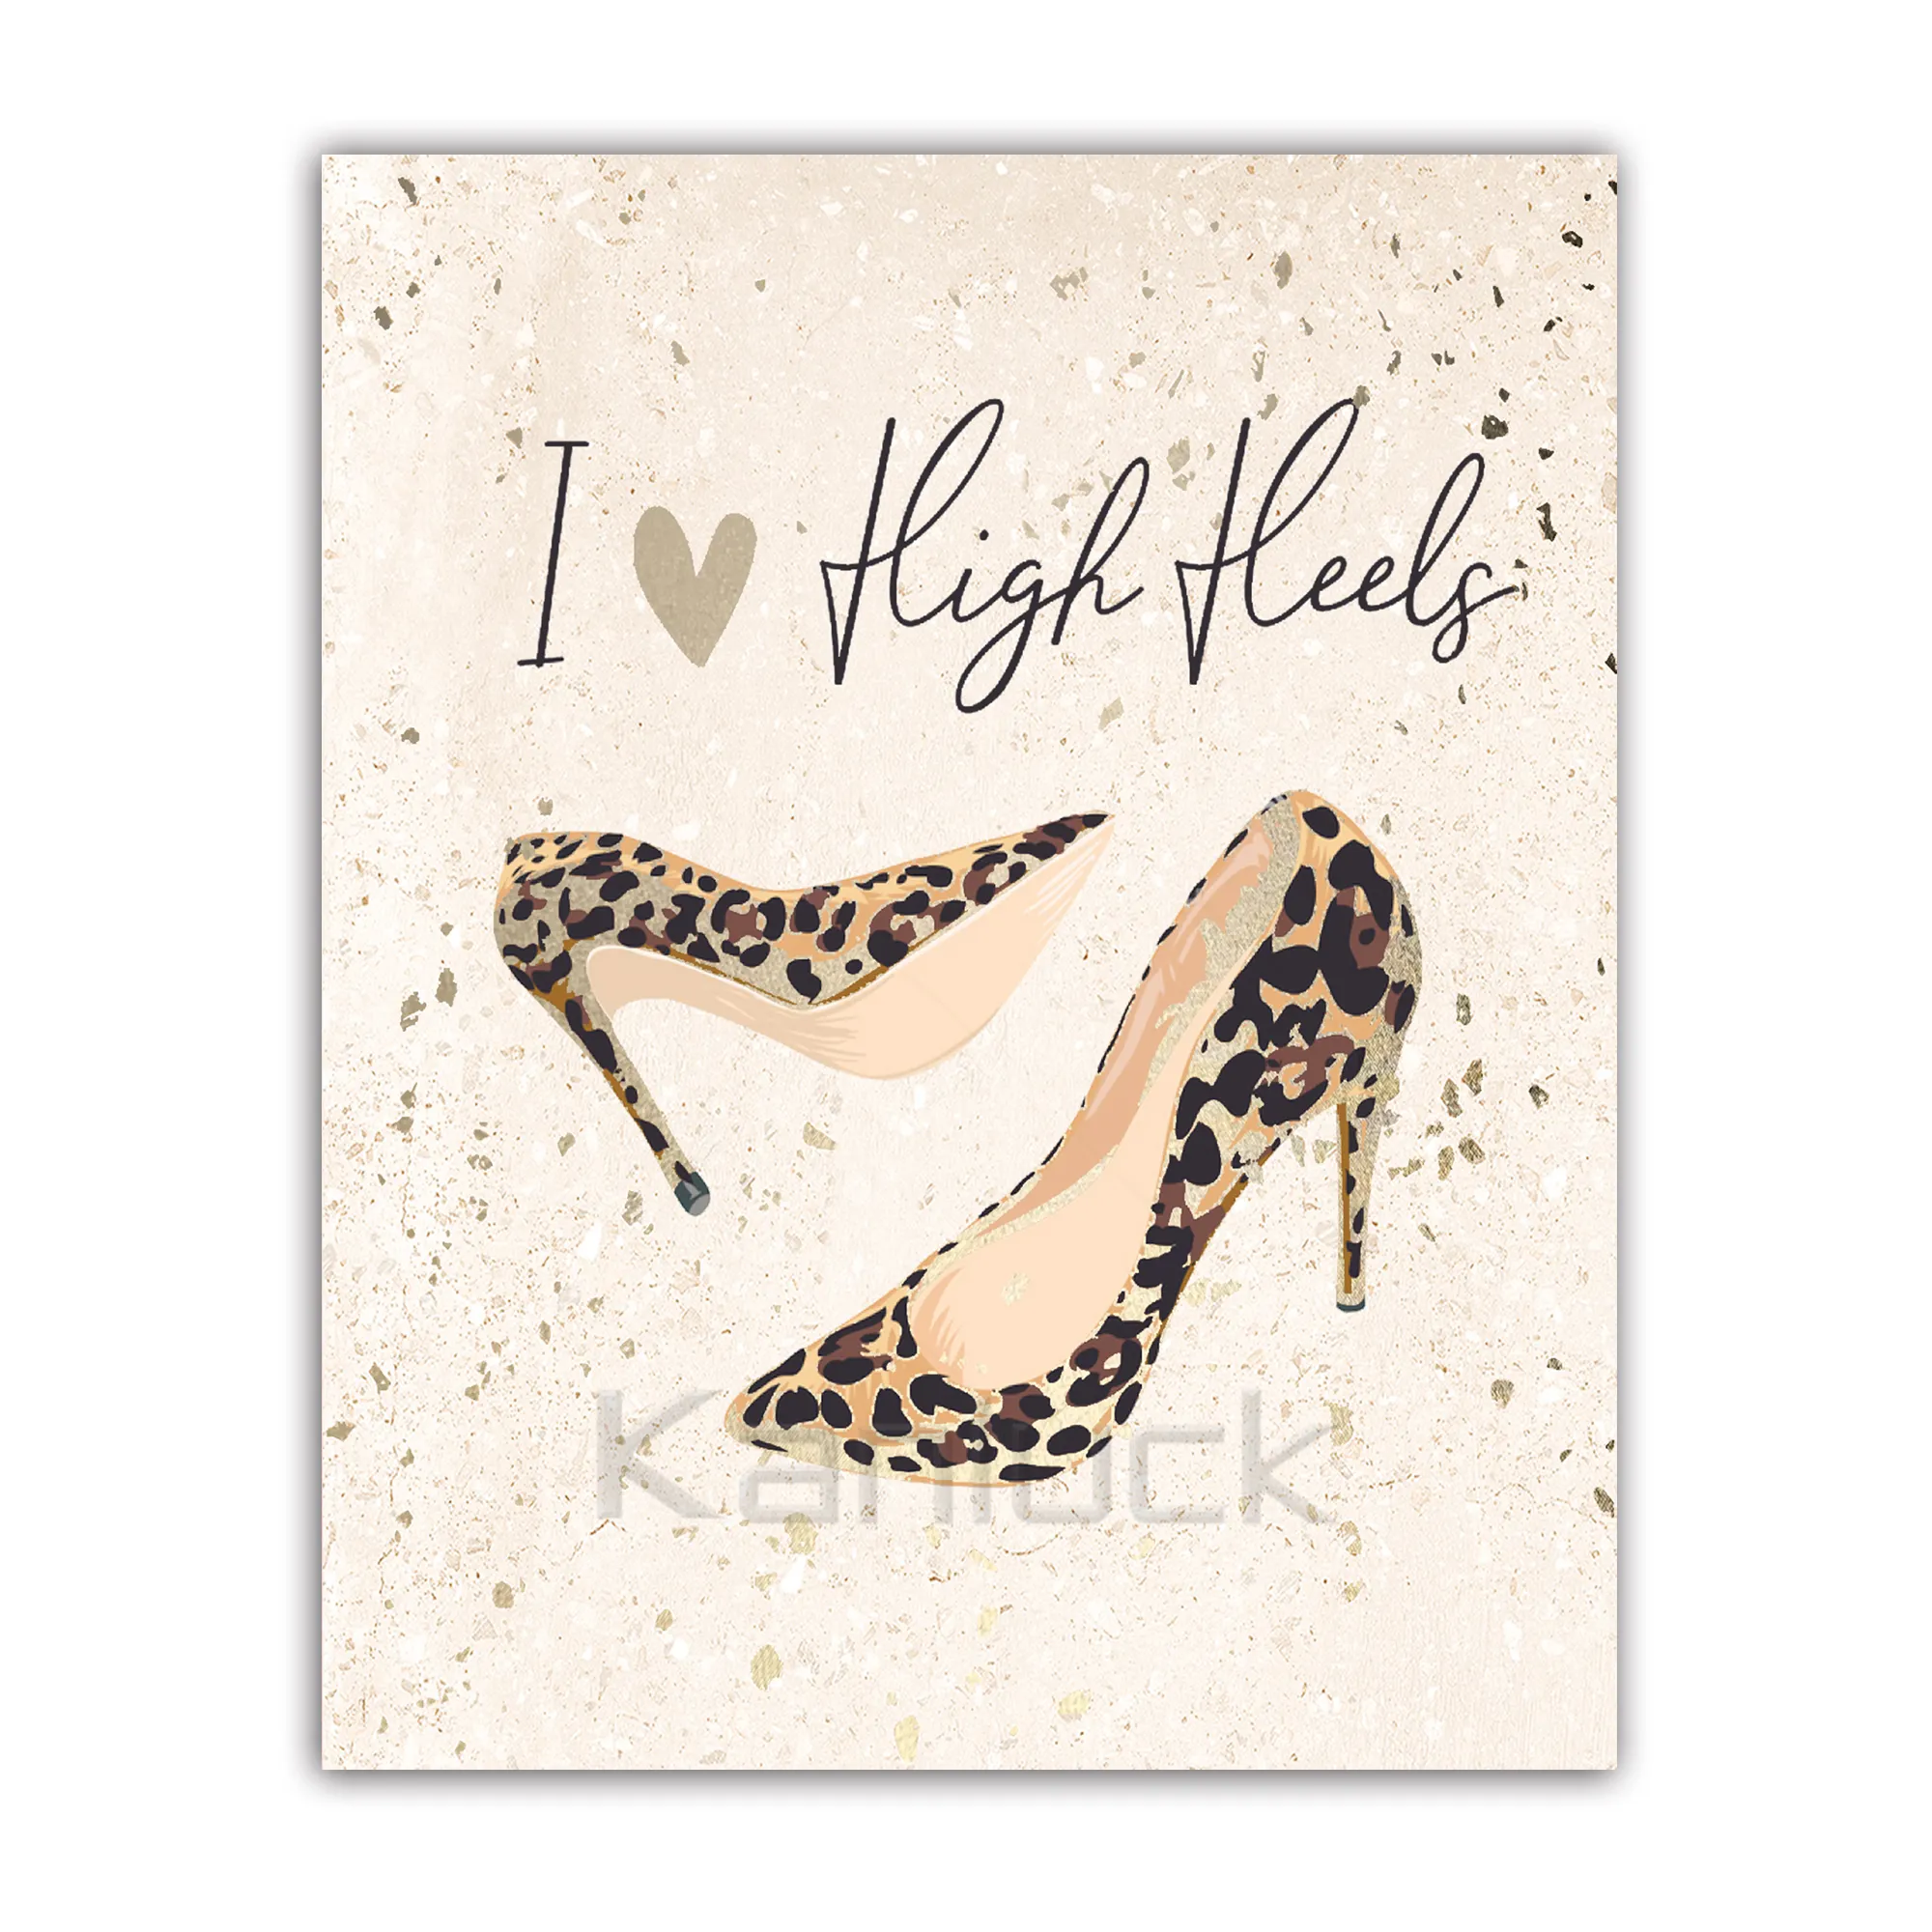 "I Love High Heel" Fashion Embellished Canvas Painting Art With Dust Glitter